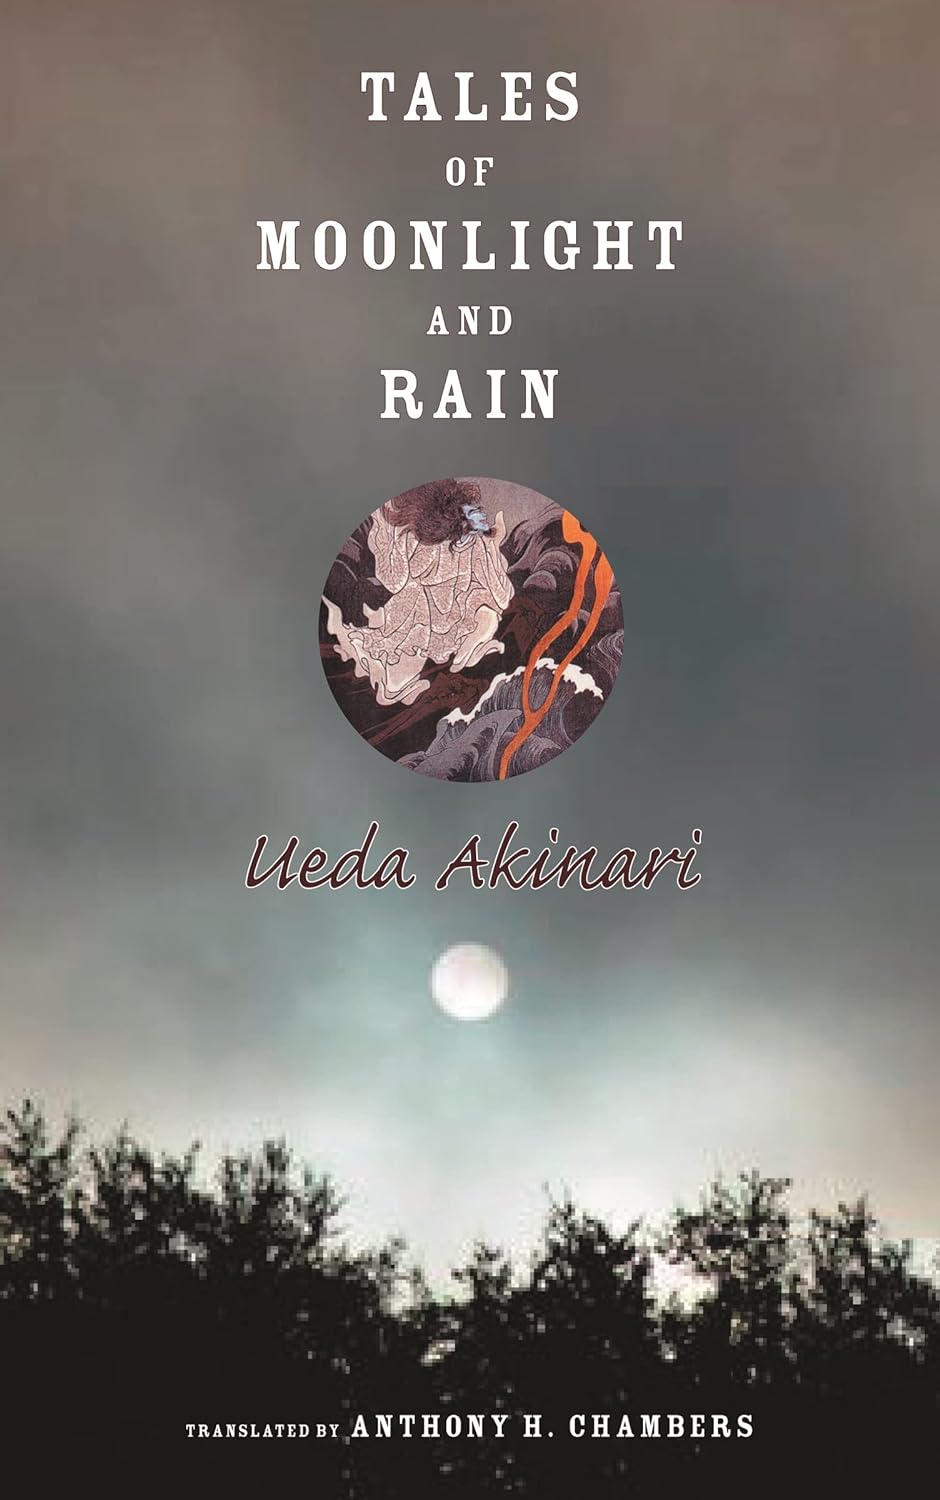 The front cover of Tales of Moonlight and Rain. The background is a grey cloudy sky with the full moon visible just above the tops of trees.